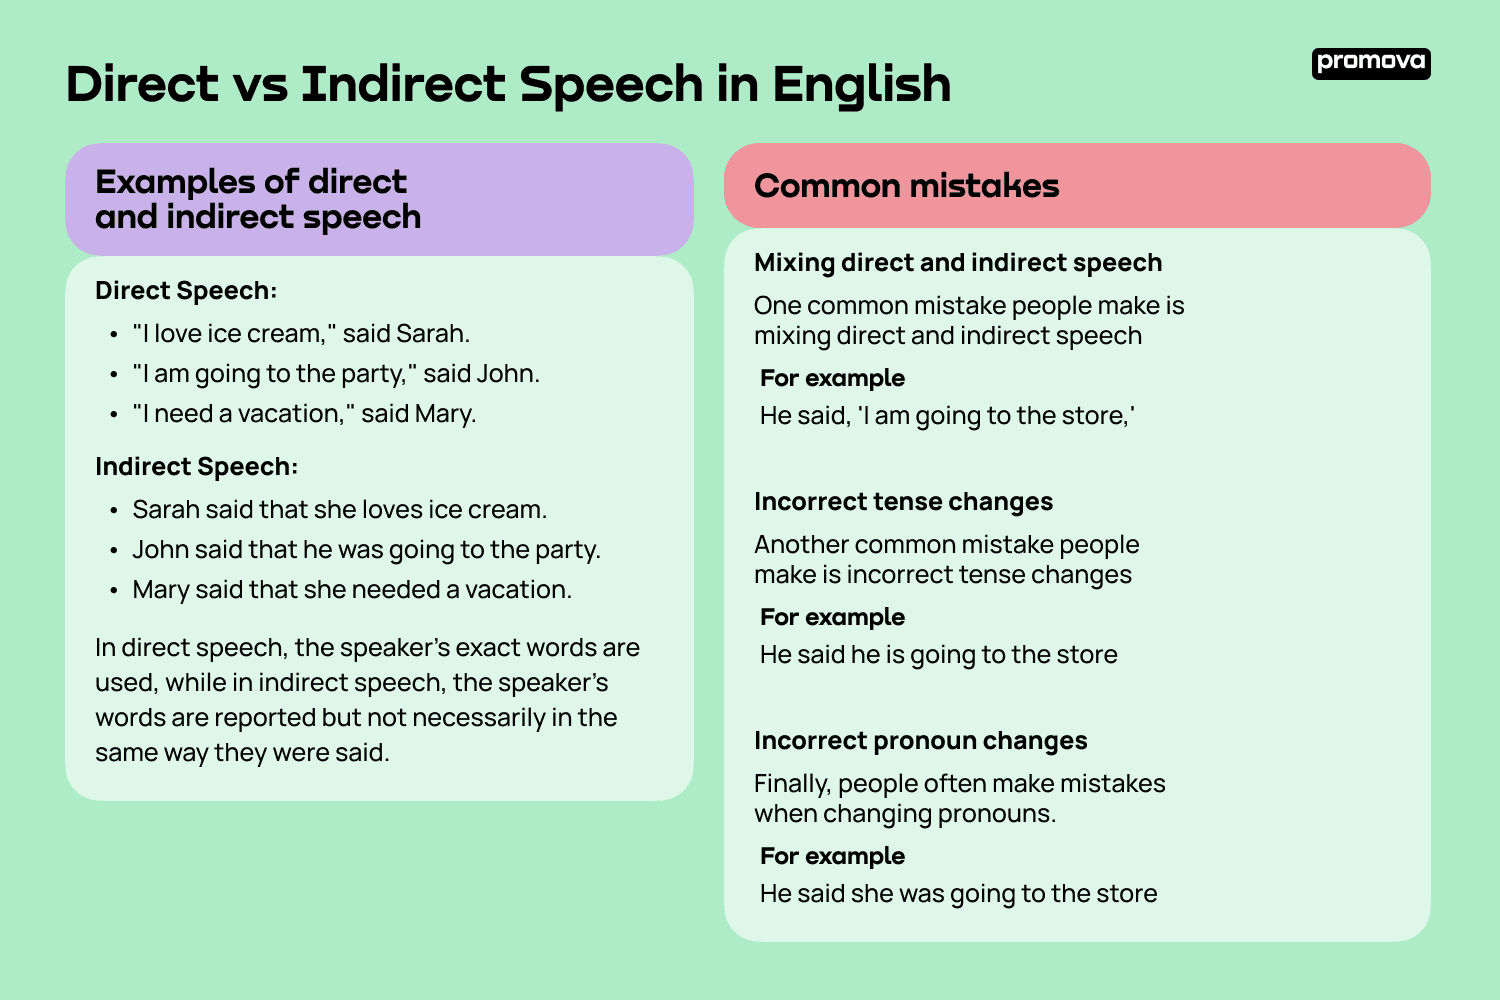 Direct vs Indirect Speech in English